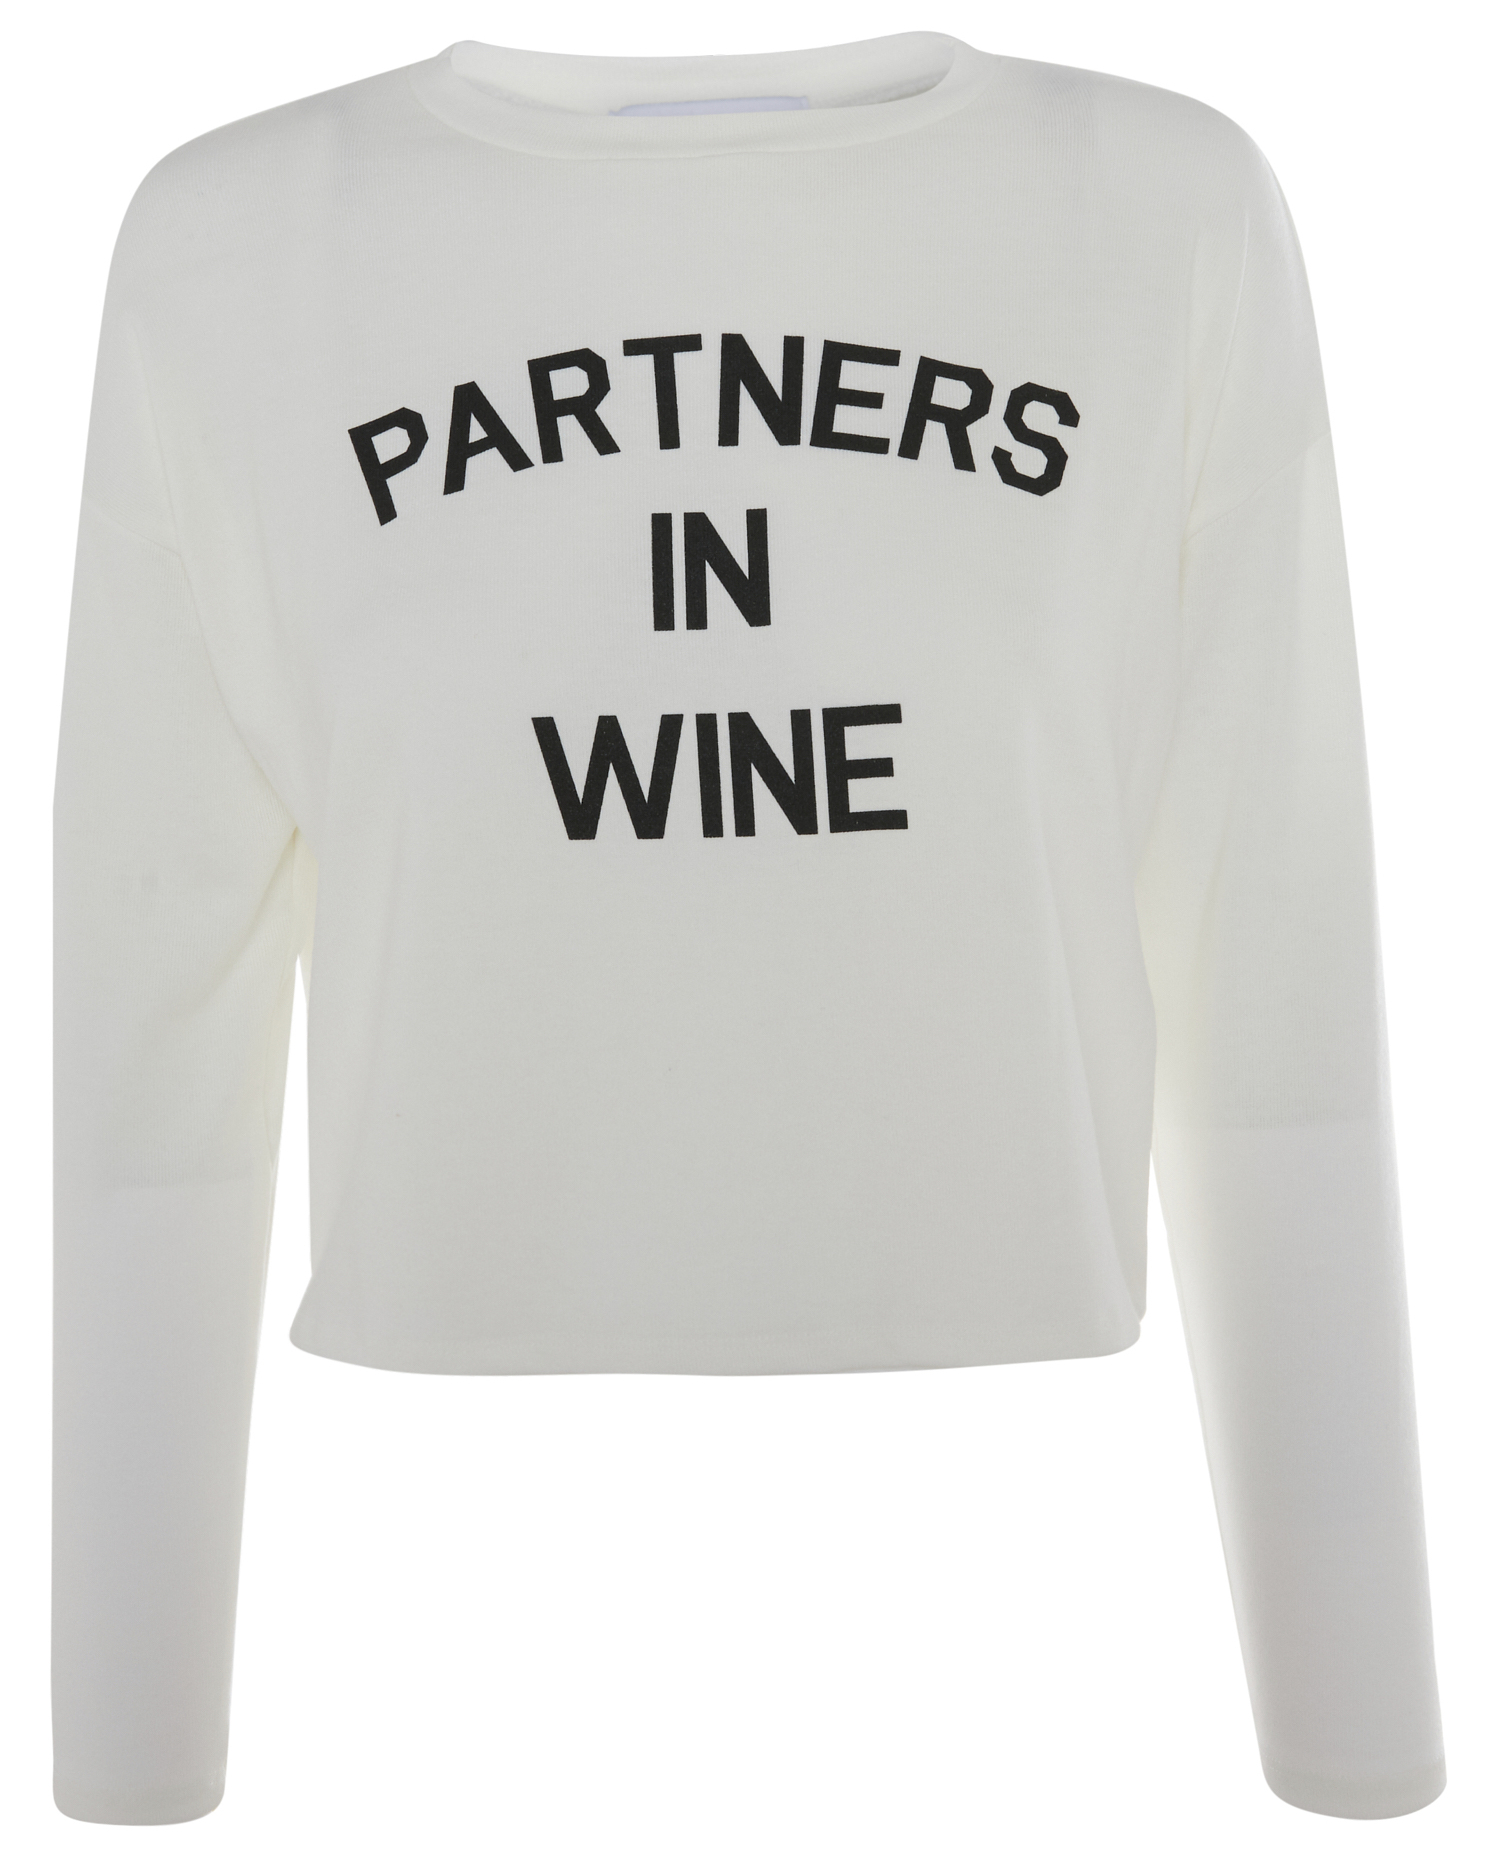 Partners in Wine Graphic Print Top